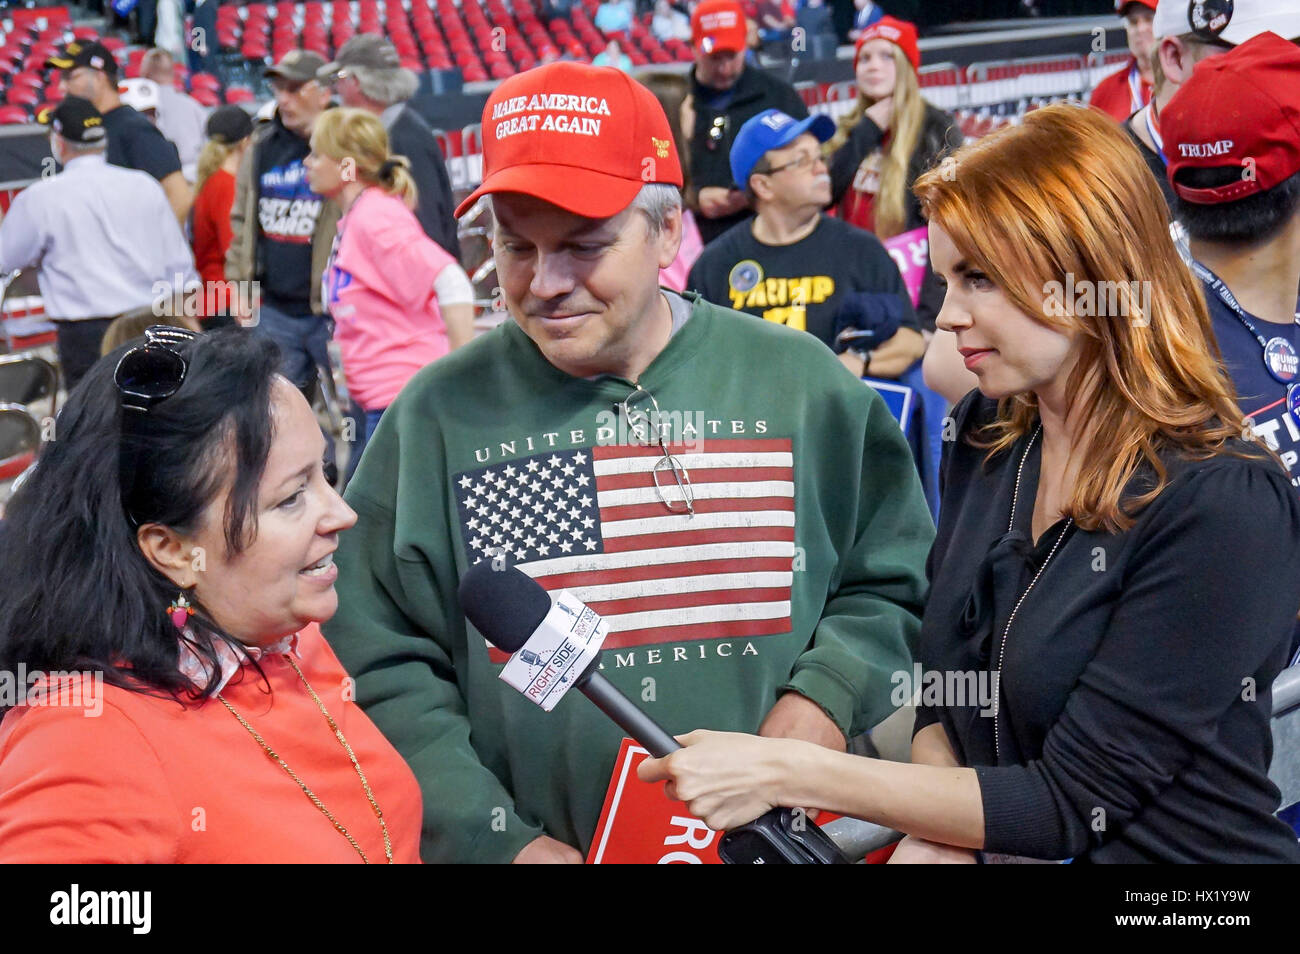 Margaret Howell is a reporter with The Right Side Broadcasting Network interviewing the President Donald J Trump Rally at Louisville Exposition Center on  March 20, 2017 in Louisville, Kentucky. Stock Photo